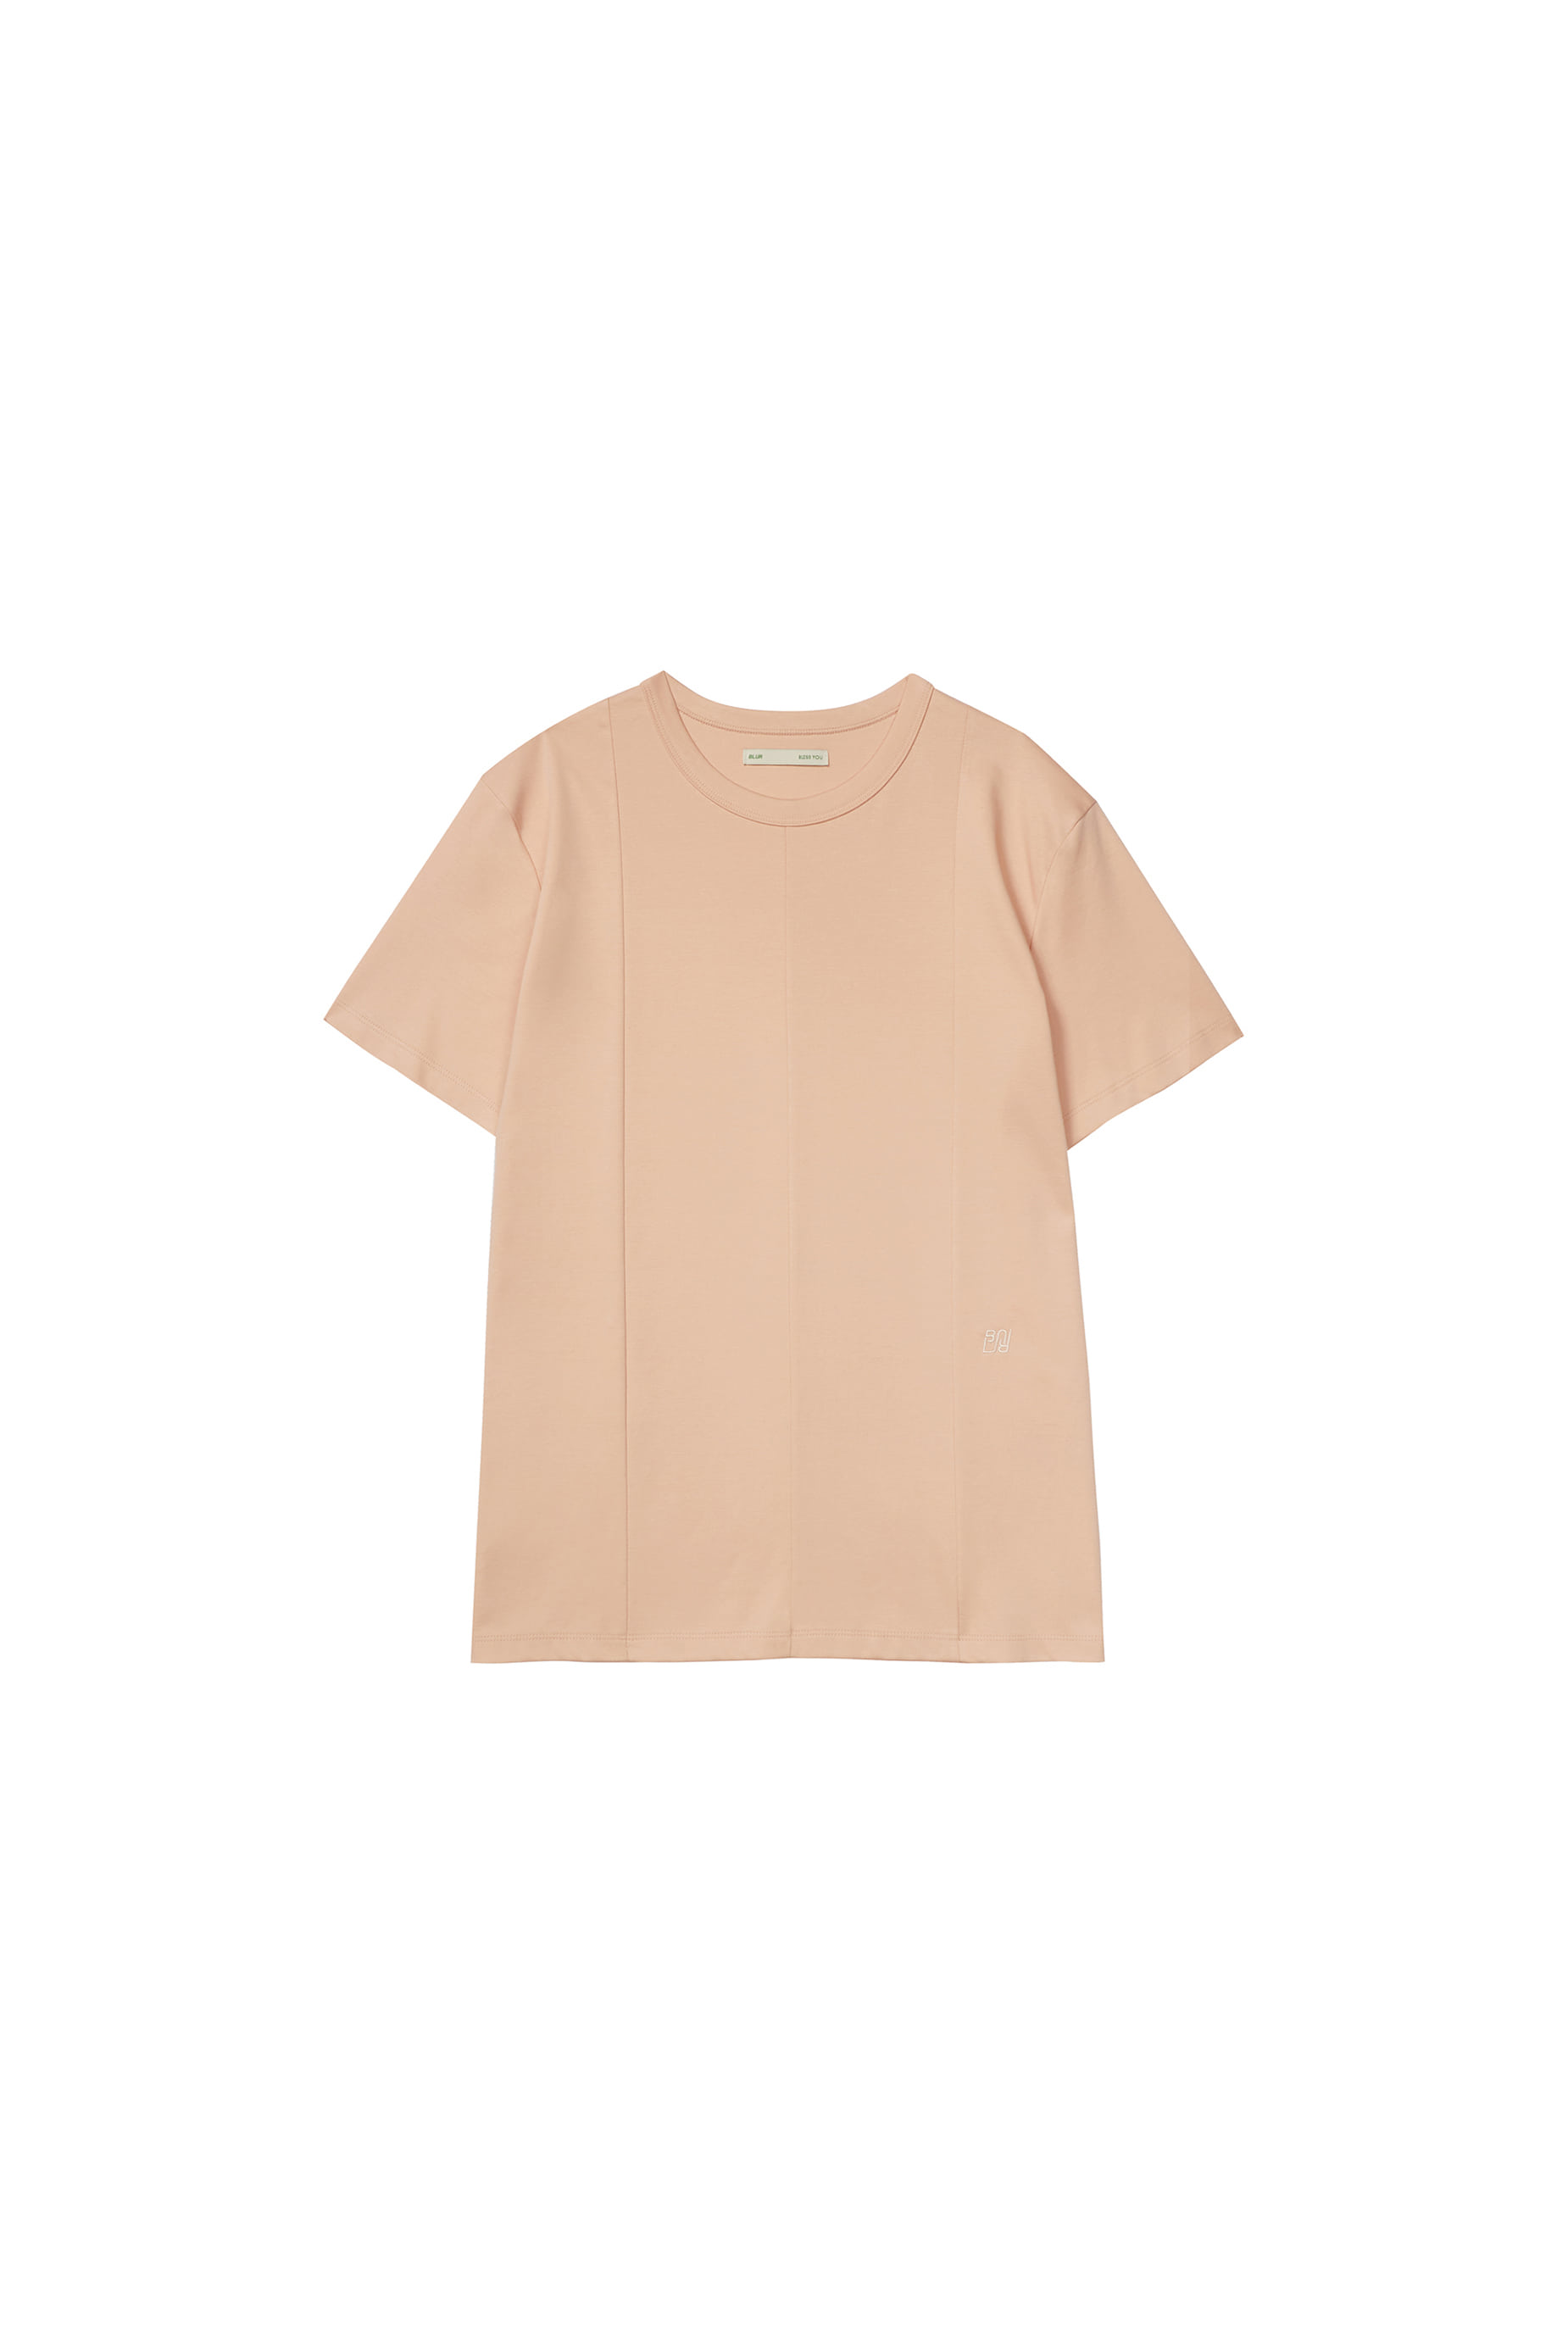 INCISION T-SHIRT - CORAL